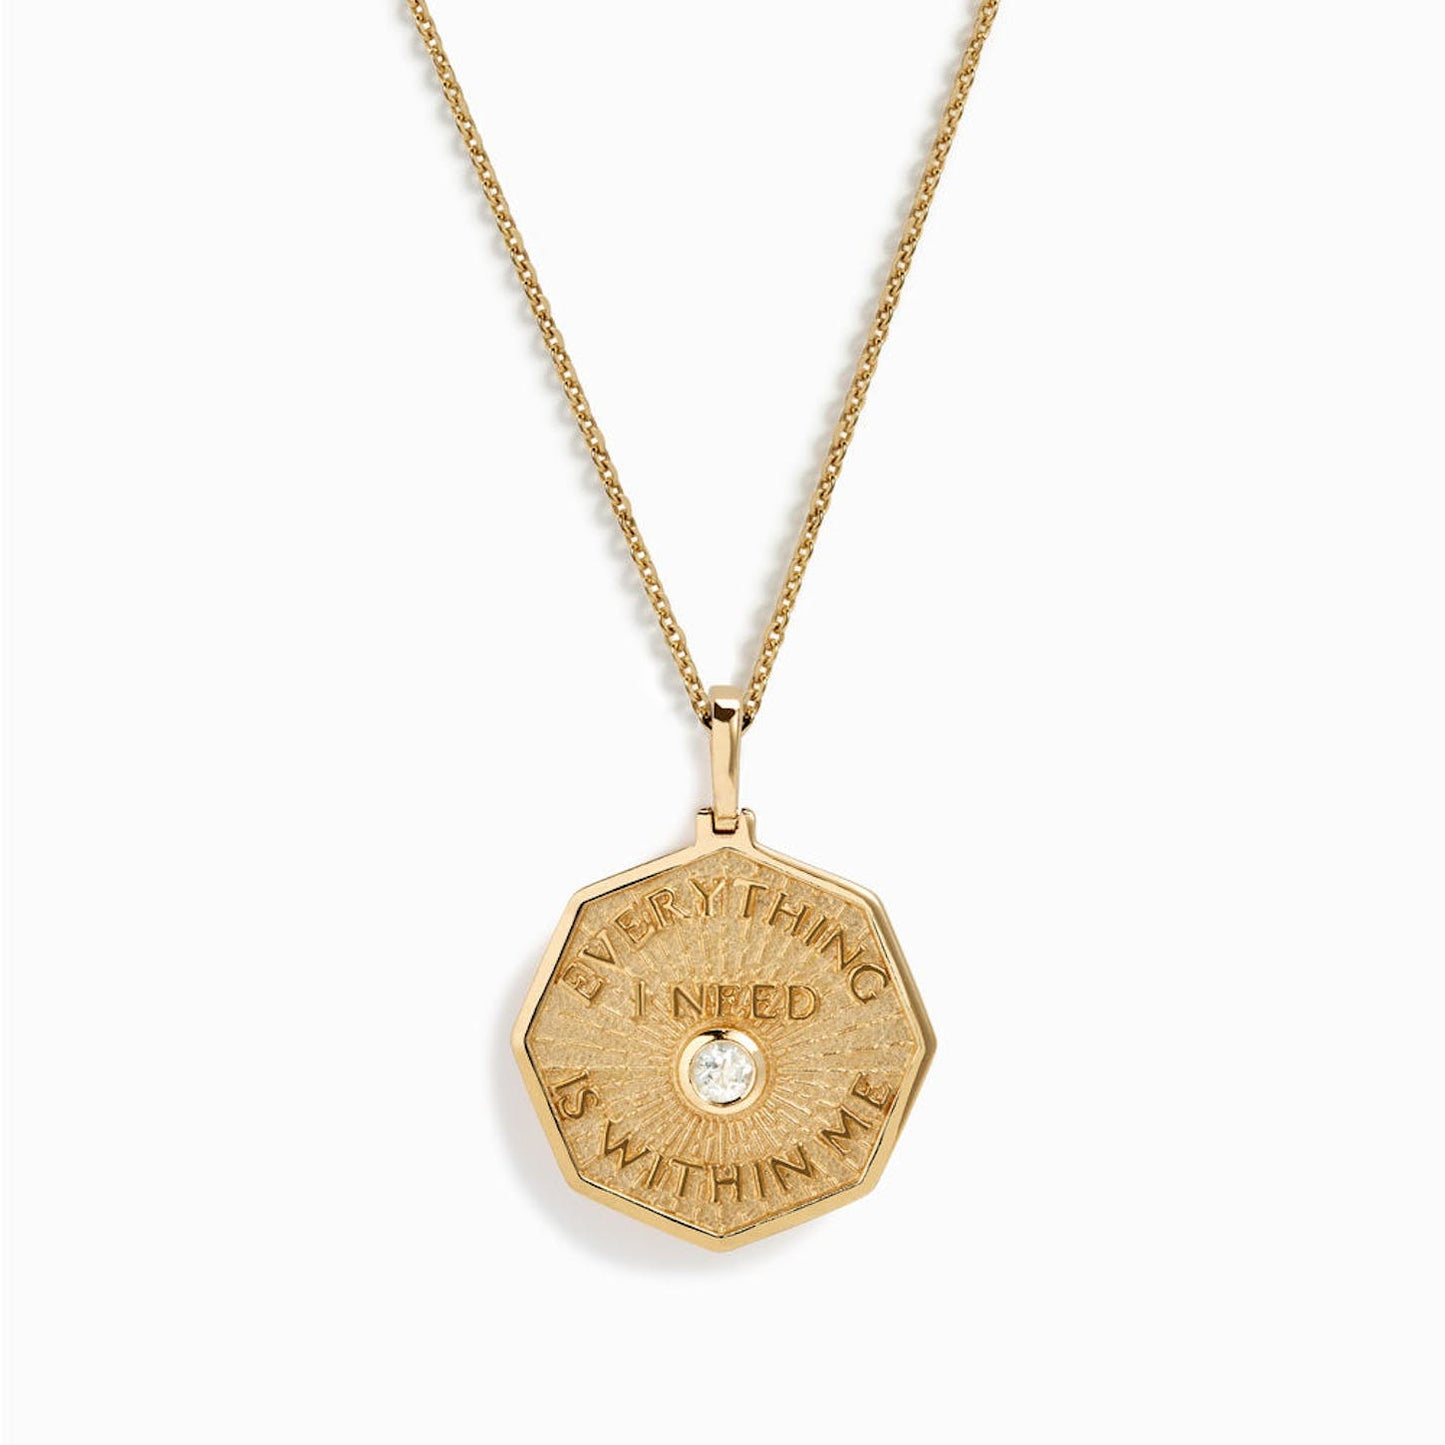 AWE Inspired Everything I Need is Within Me Pendant Necklace